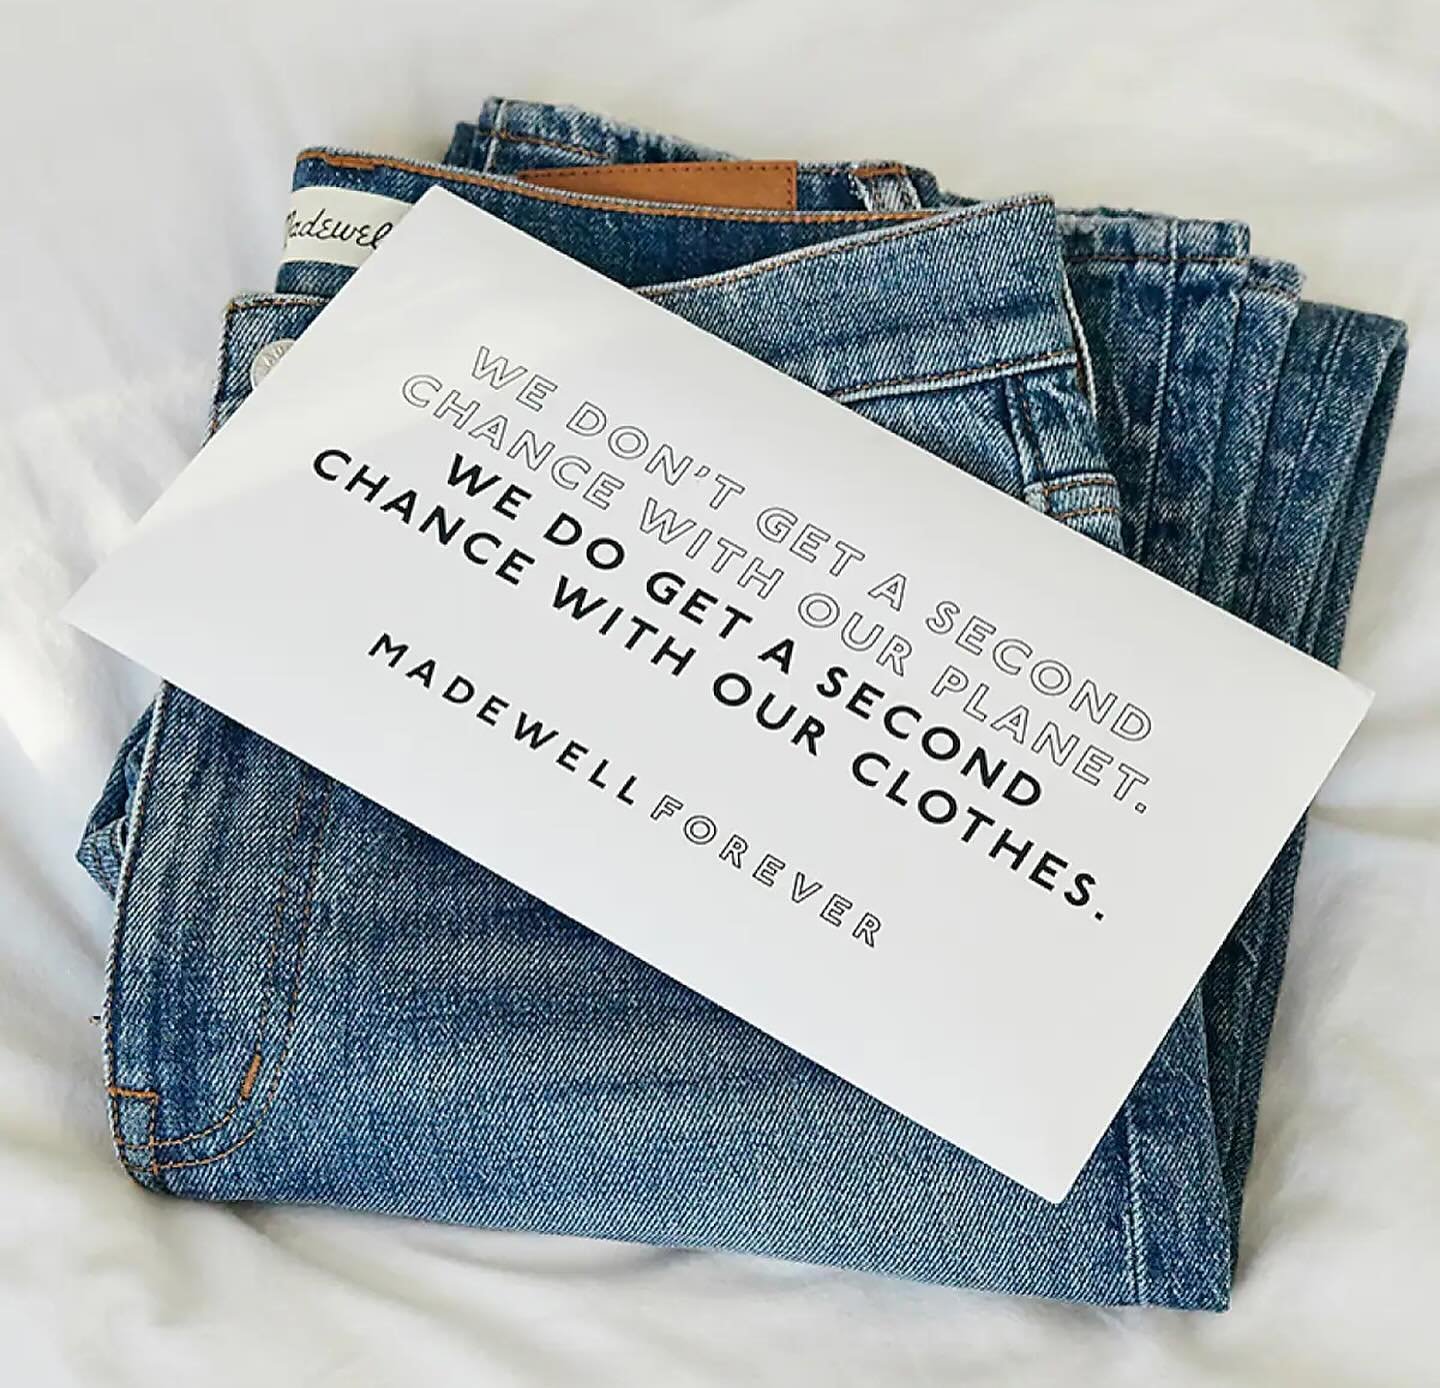 Join us this Friday, April 19 for a denim recycling drive in celebration of Earth Day! Our friends at @madewell will be at Rise from 10 AM to 1 PM. 

Give jeans a second life by recycling an old pair that will be turned into housing insulation for co